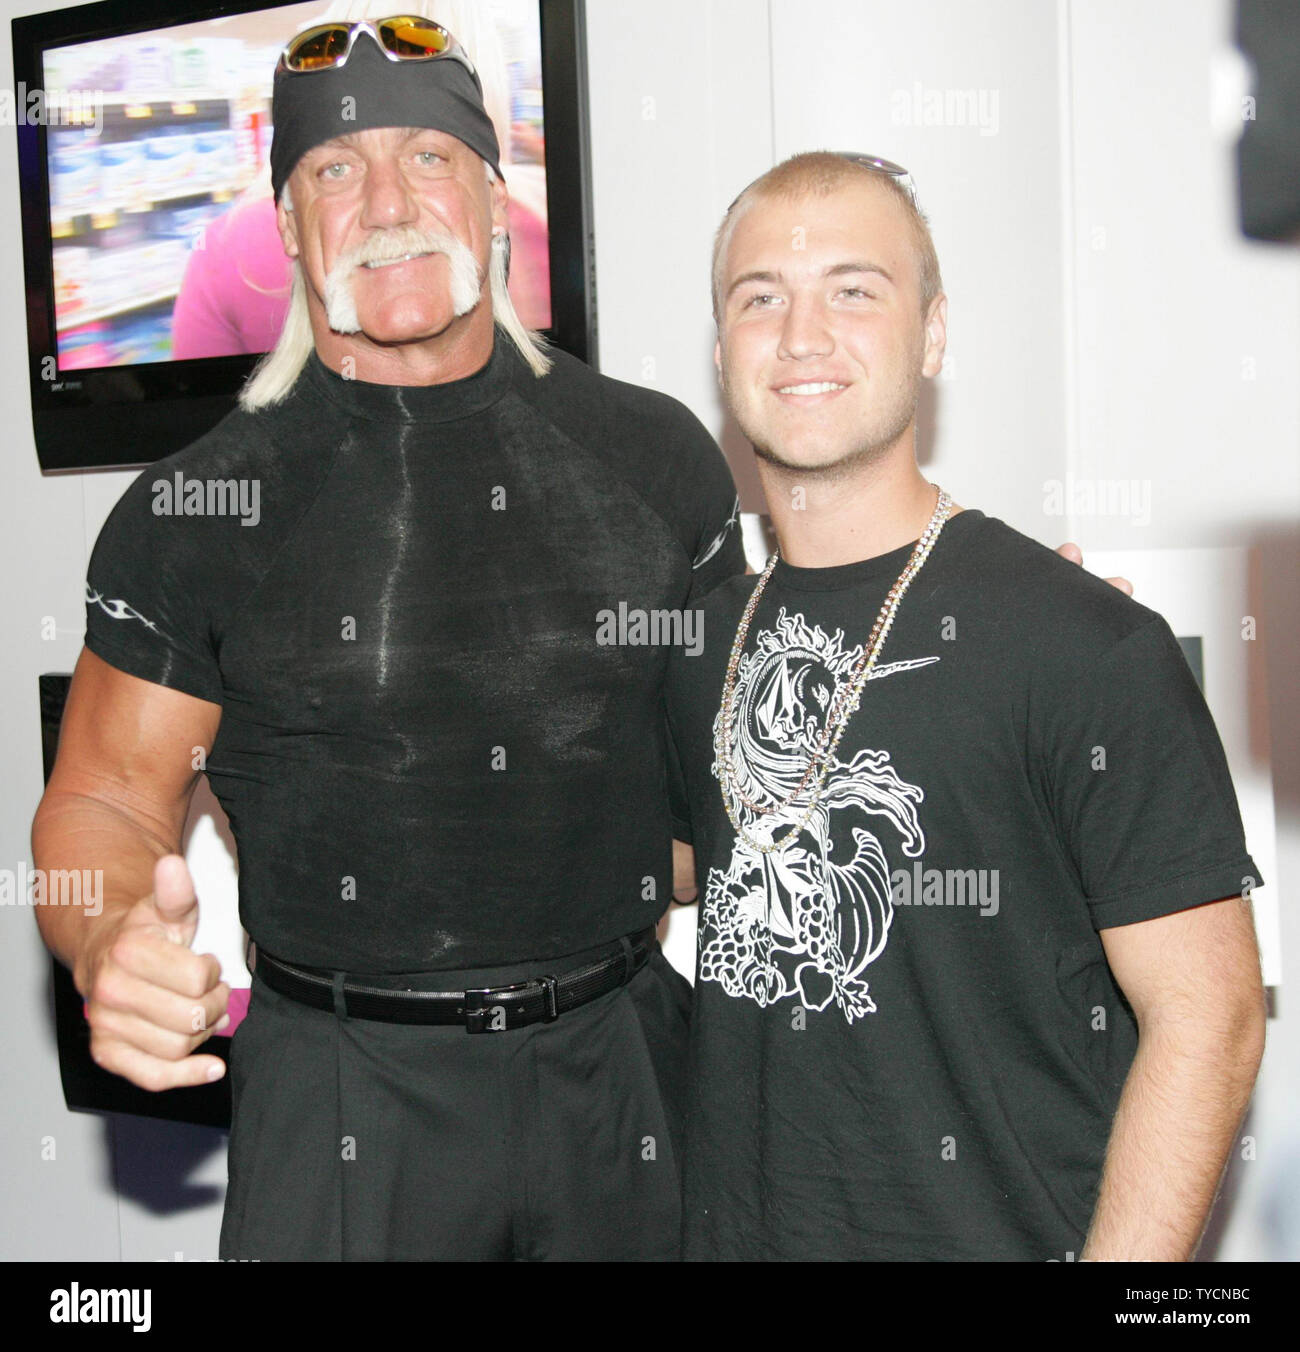 stemme vitamin inerti Wrestler-actor Hulk Hogan and his son Nick are seen at the Polaroid display  at the 2007 Consumer Electronics Show at the Las Vegas Convention Center in  Las Vegas on January 10, 2007. (